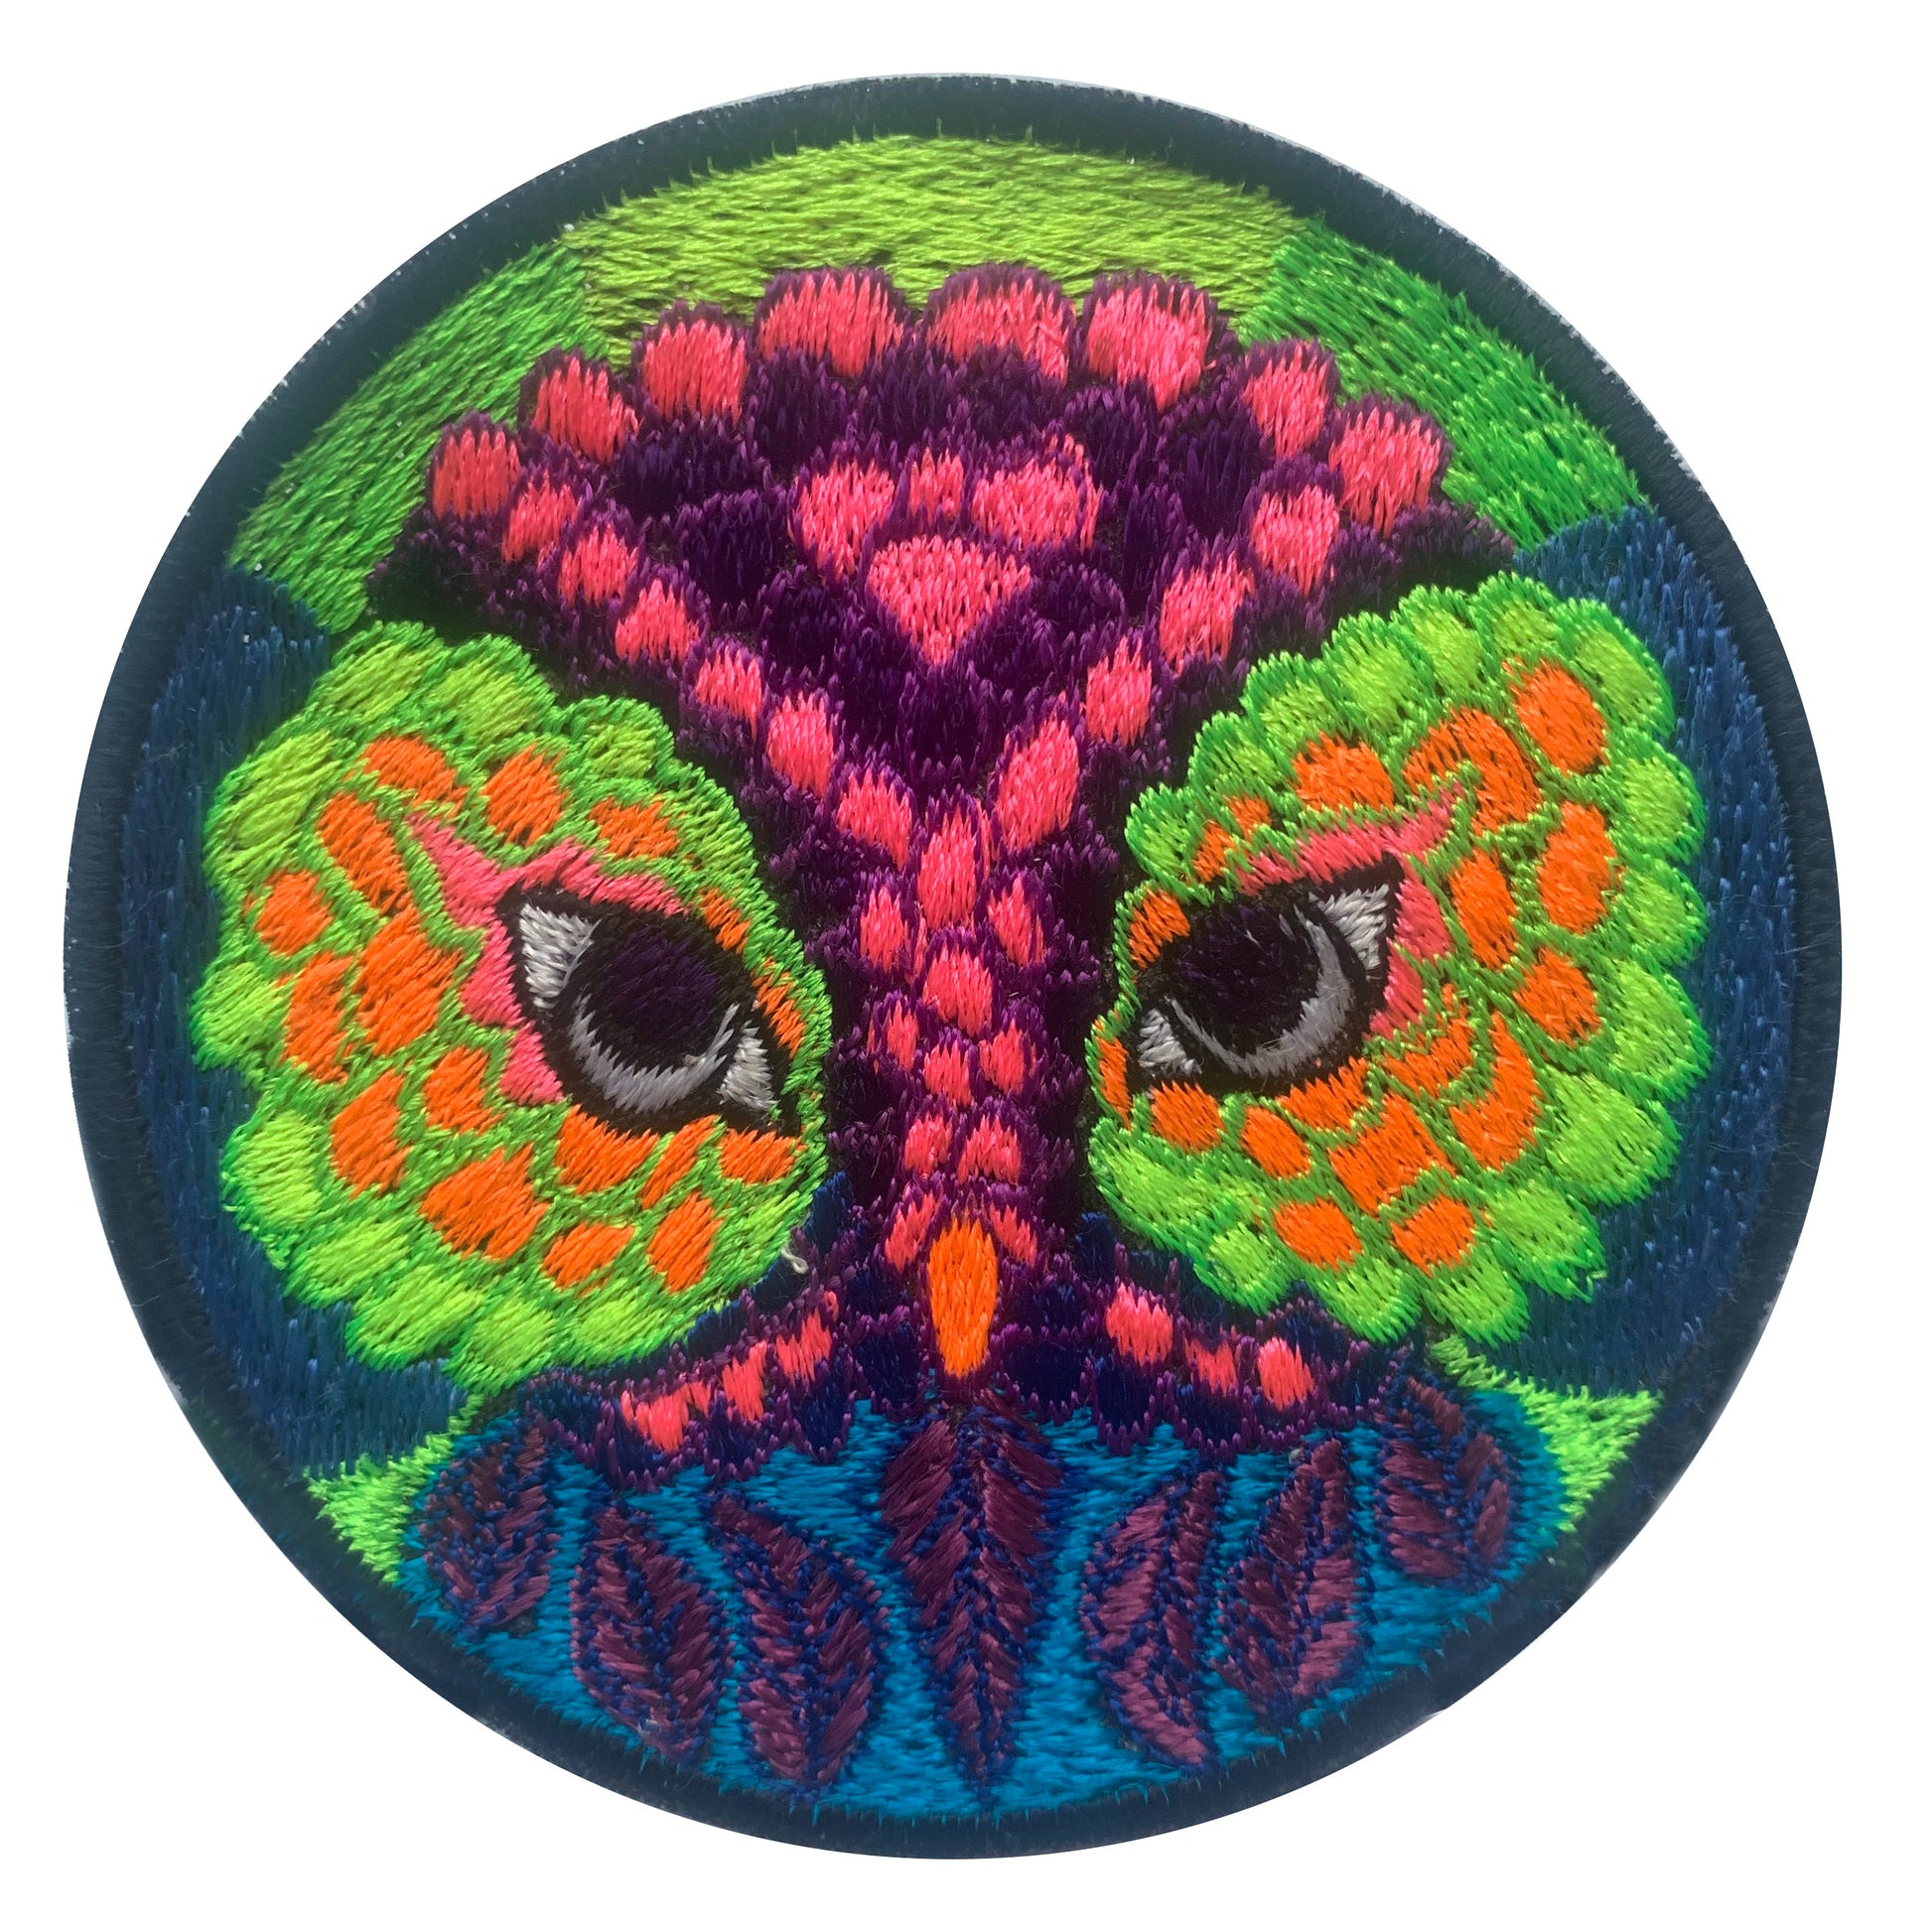 psychedelic Owl embroidery patch - blacklight glowing UV colors - beautiful owl which looks like a tree from the magic forest